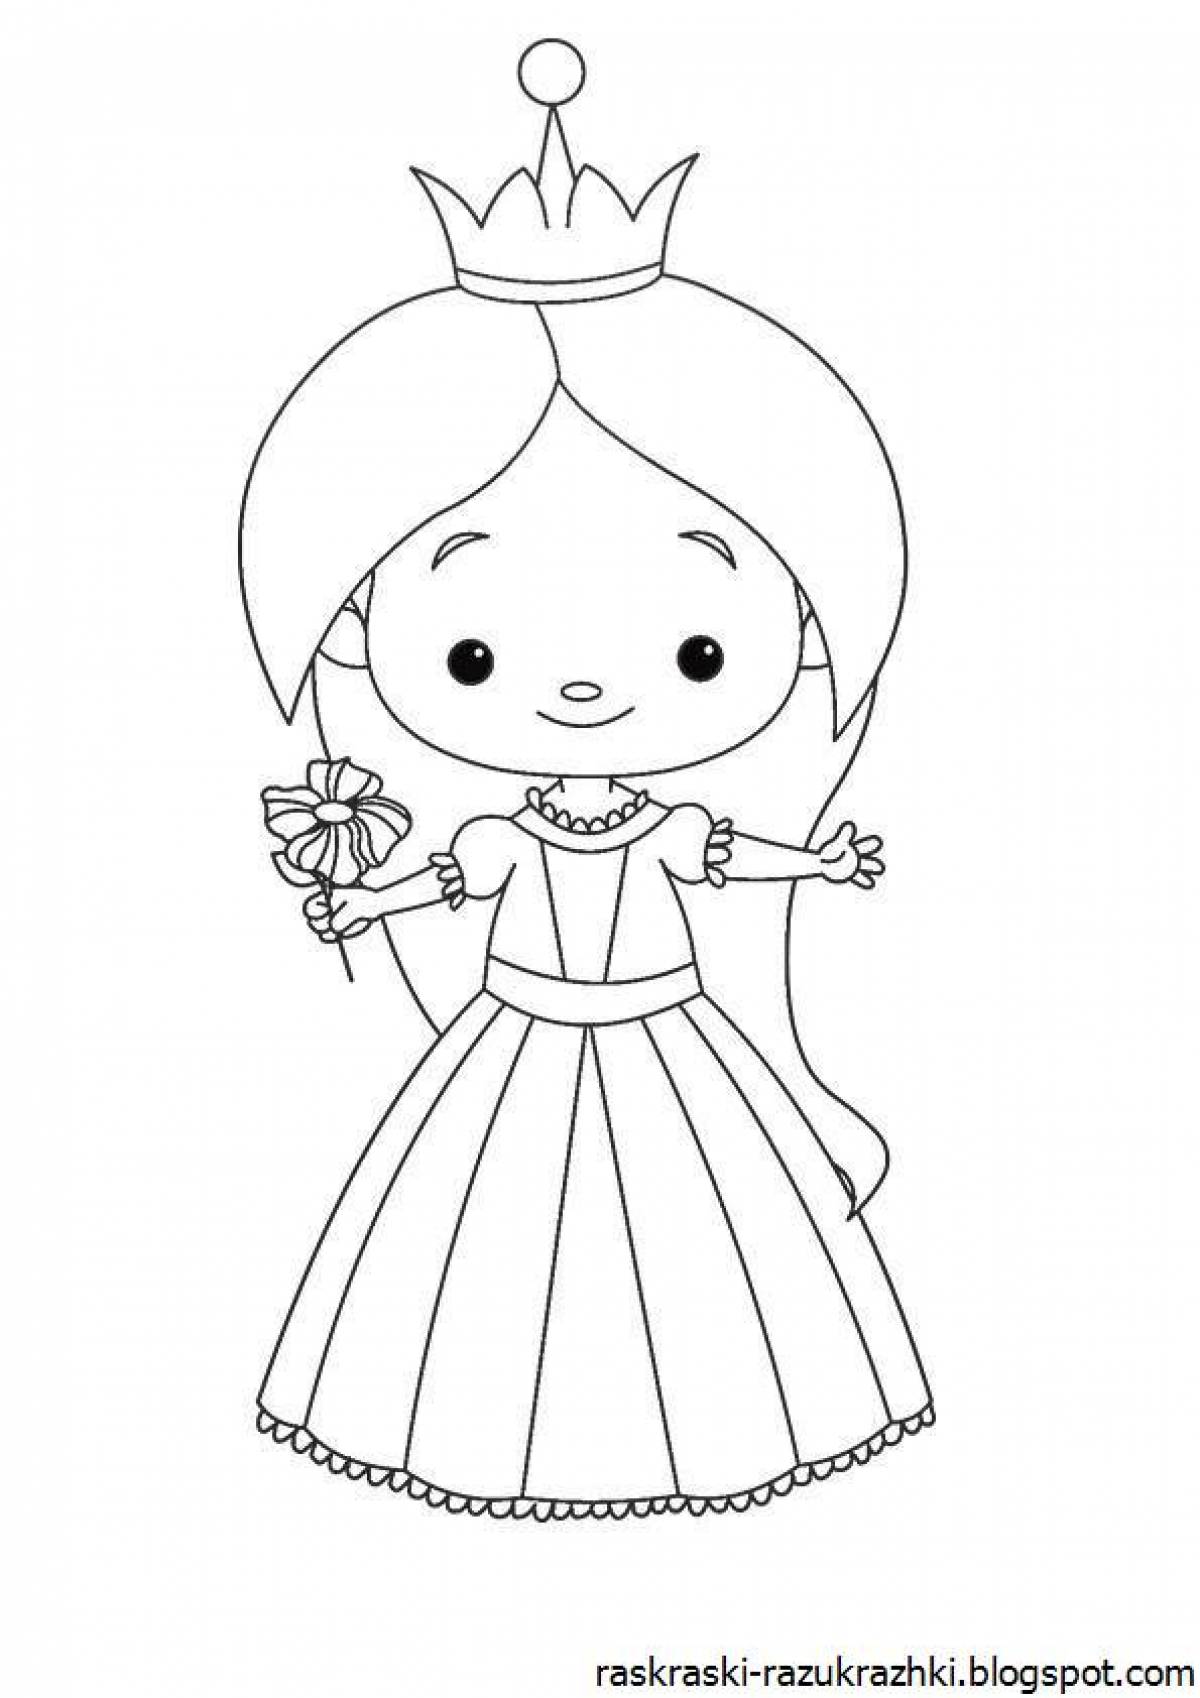 Awesome princess coloring pages for kids